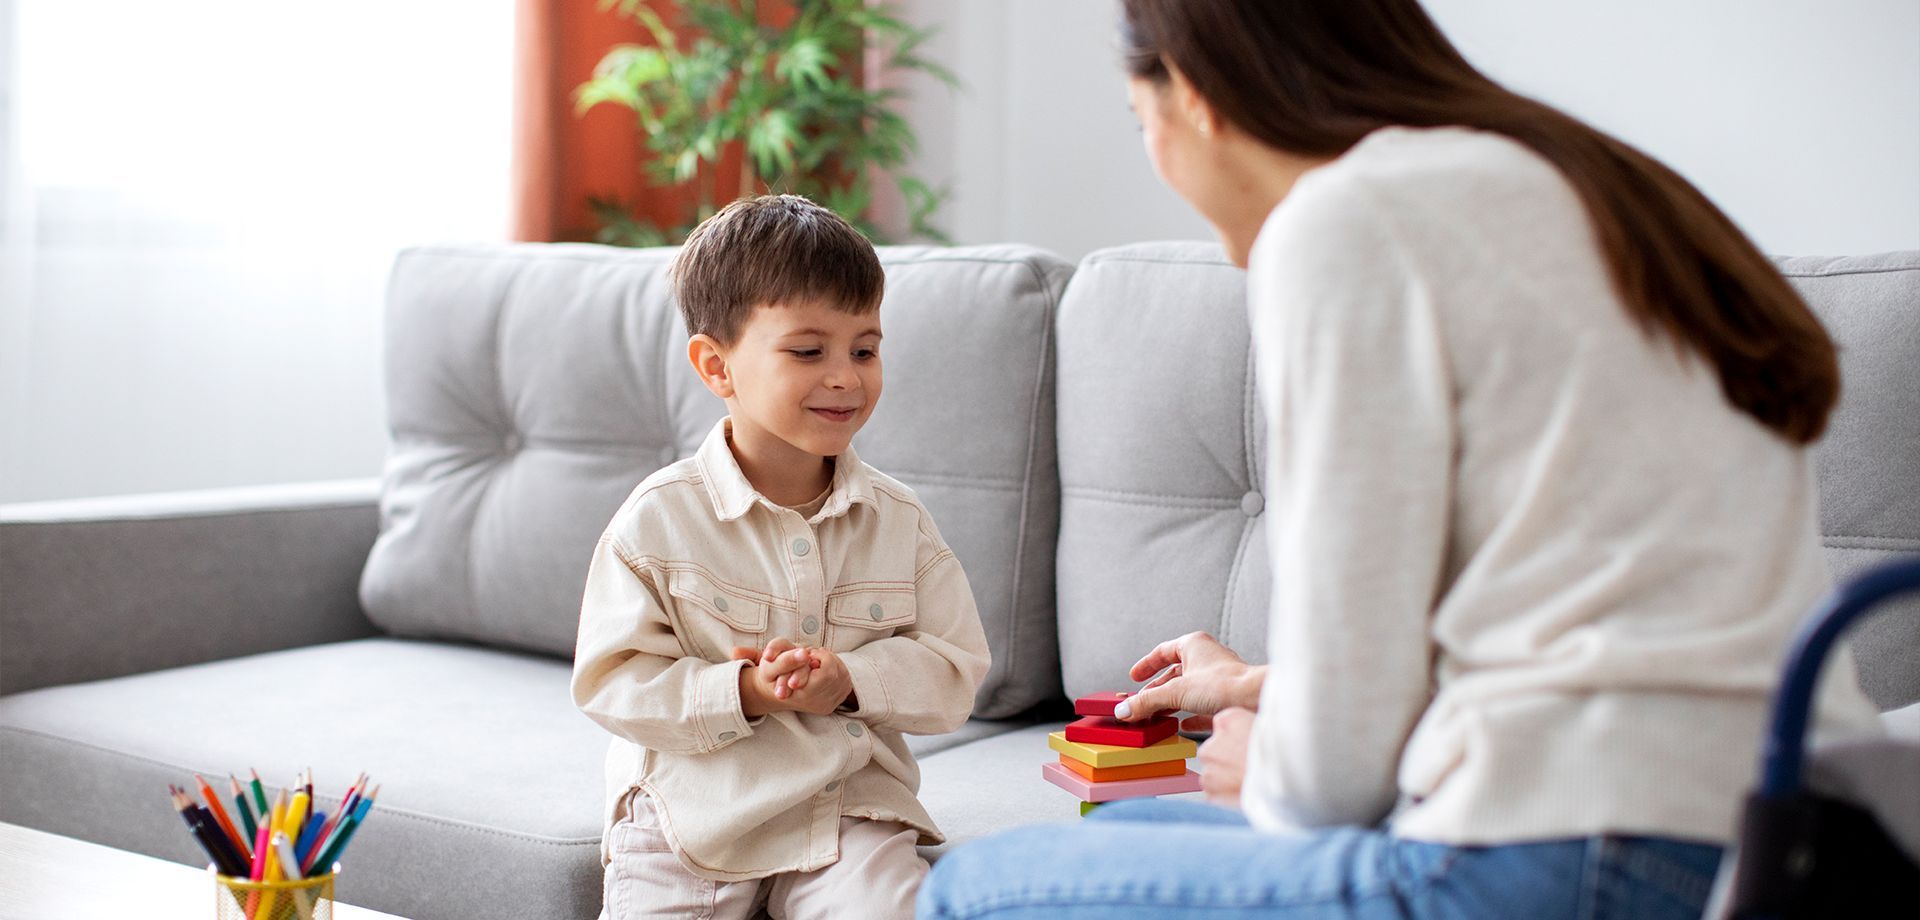 A woman sitting on a couch talking to a young boy.